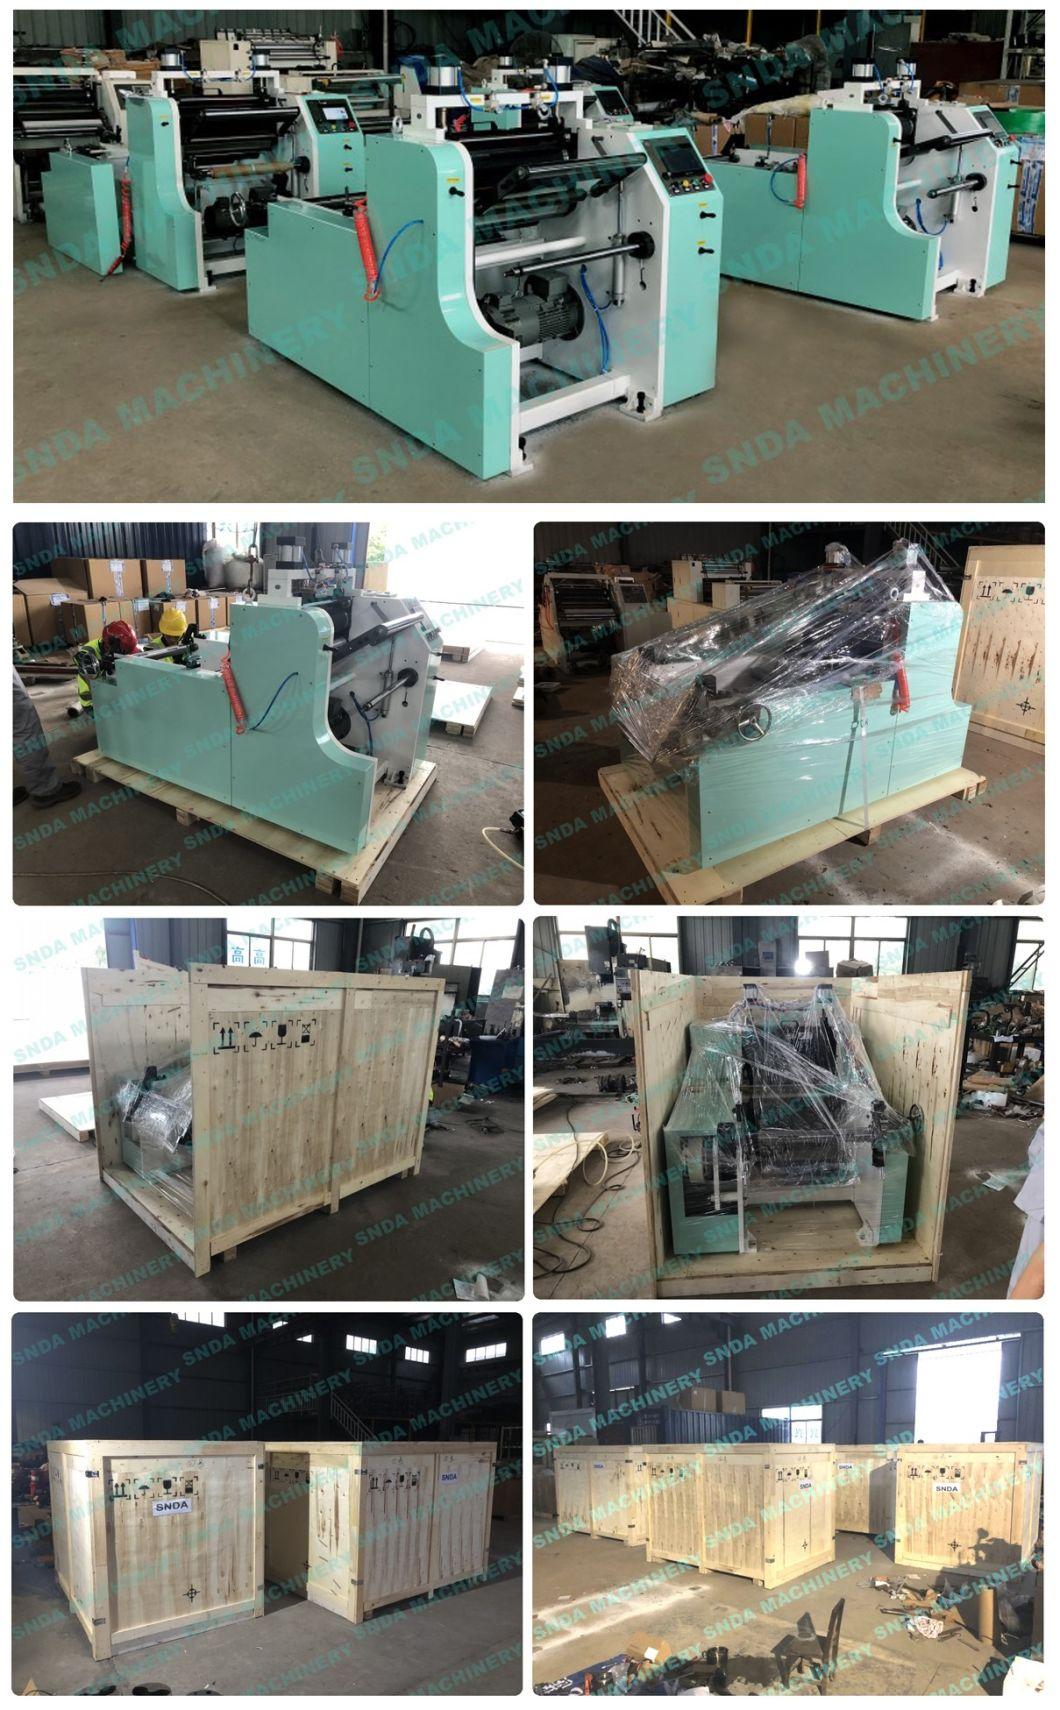 Honeycomb Packing Paper Forming Honeycomb Paper Cutting Honeycomb Paper Making Machine